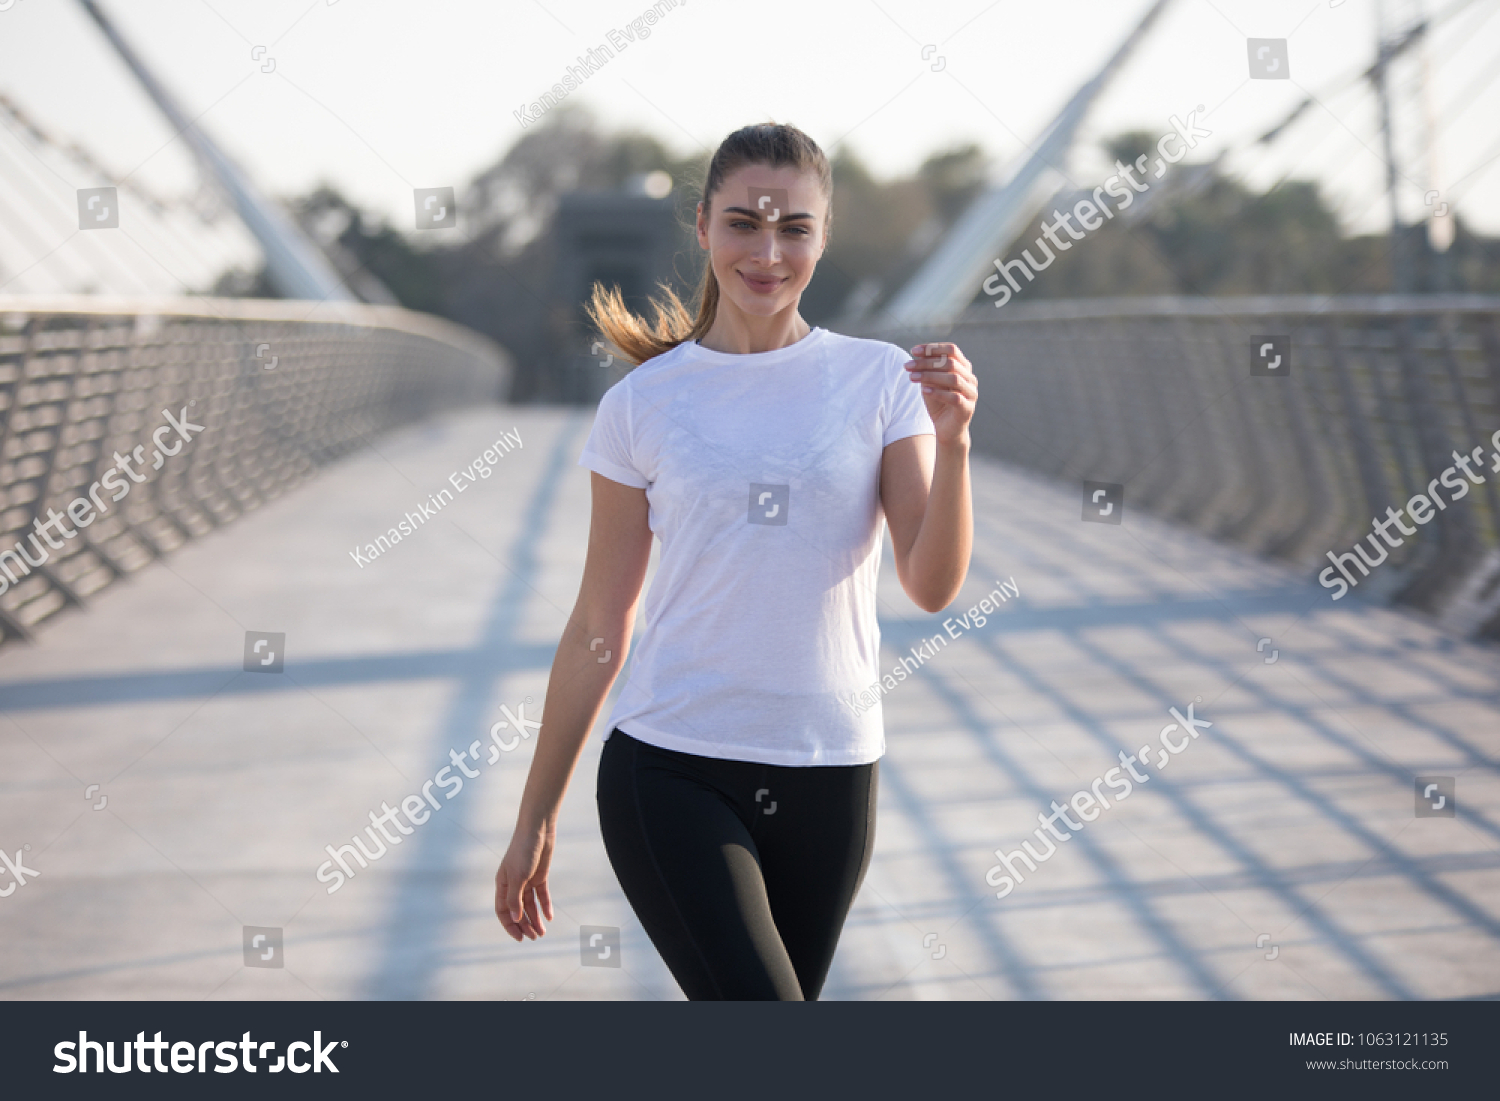 Sports woman in a white T-shirt while training on the bridge. Mock-up. #1063121135